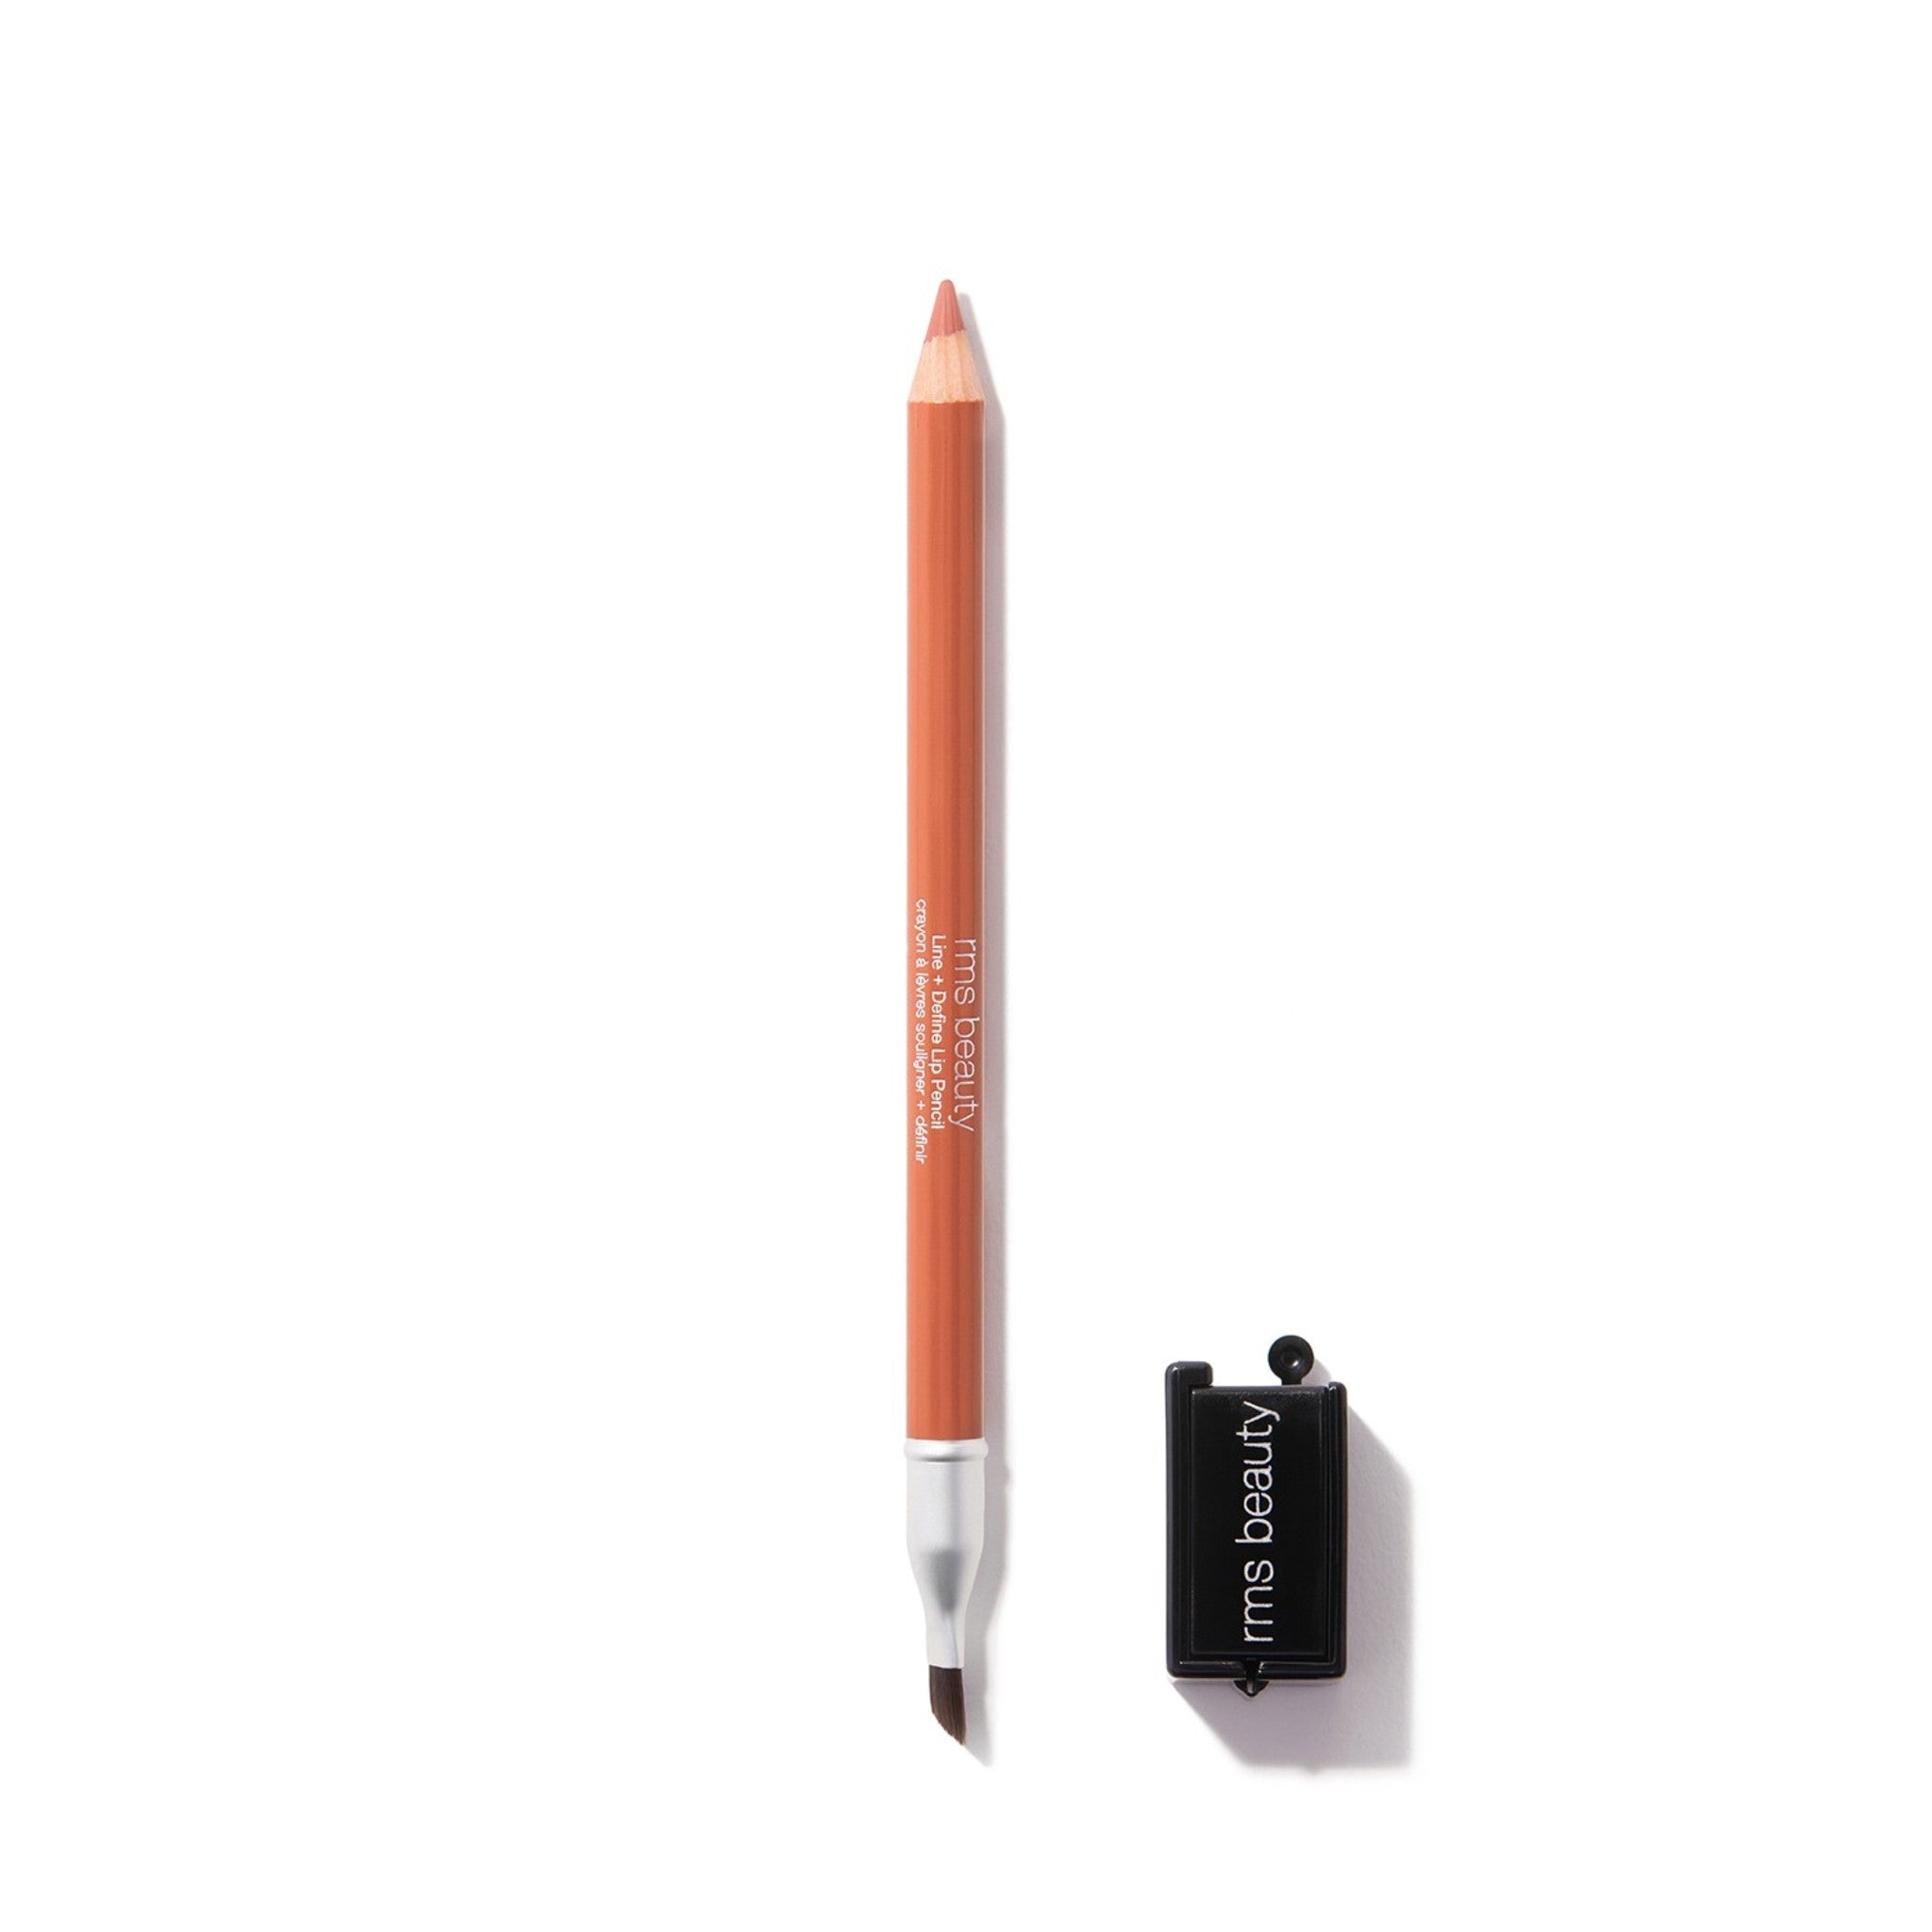 RMS Beauty Go Nude Lip Pencil Color/Shade variant: Daytime Nude main image. This product is in the color nude